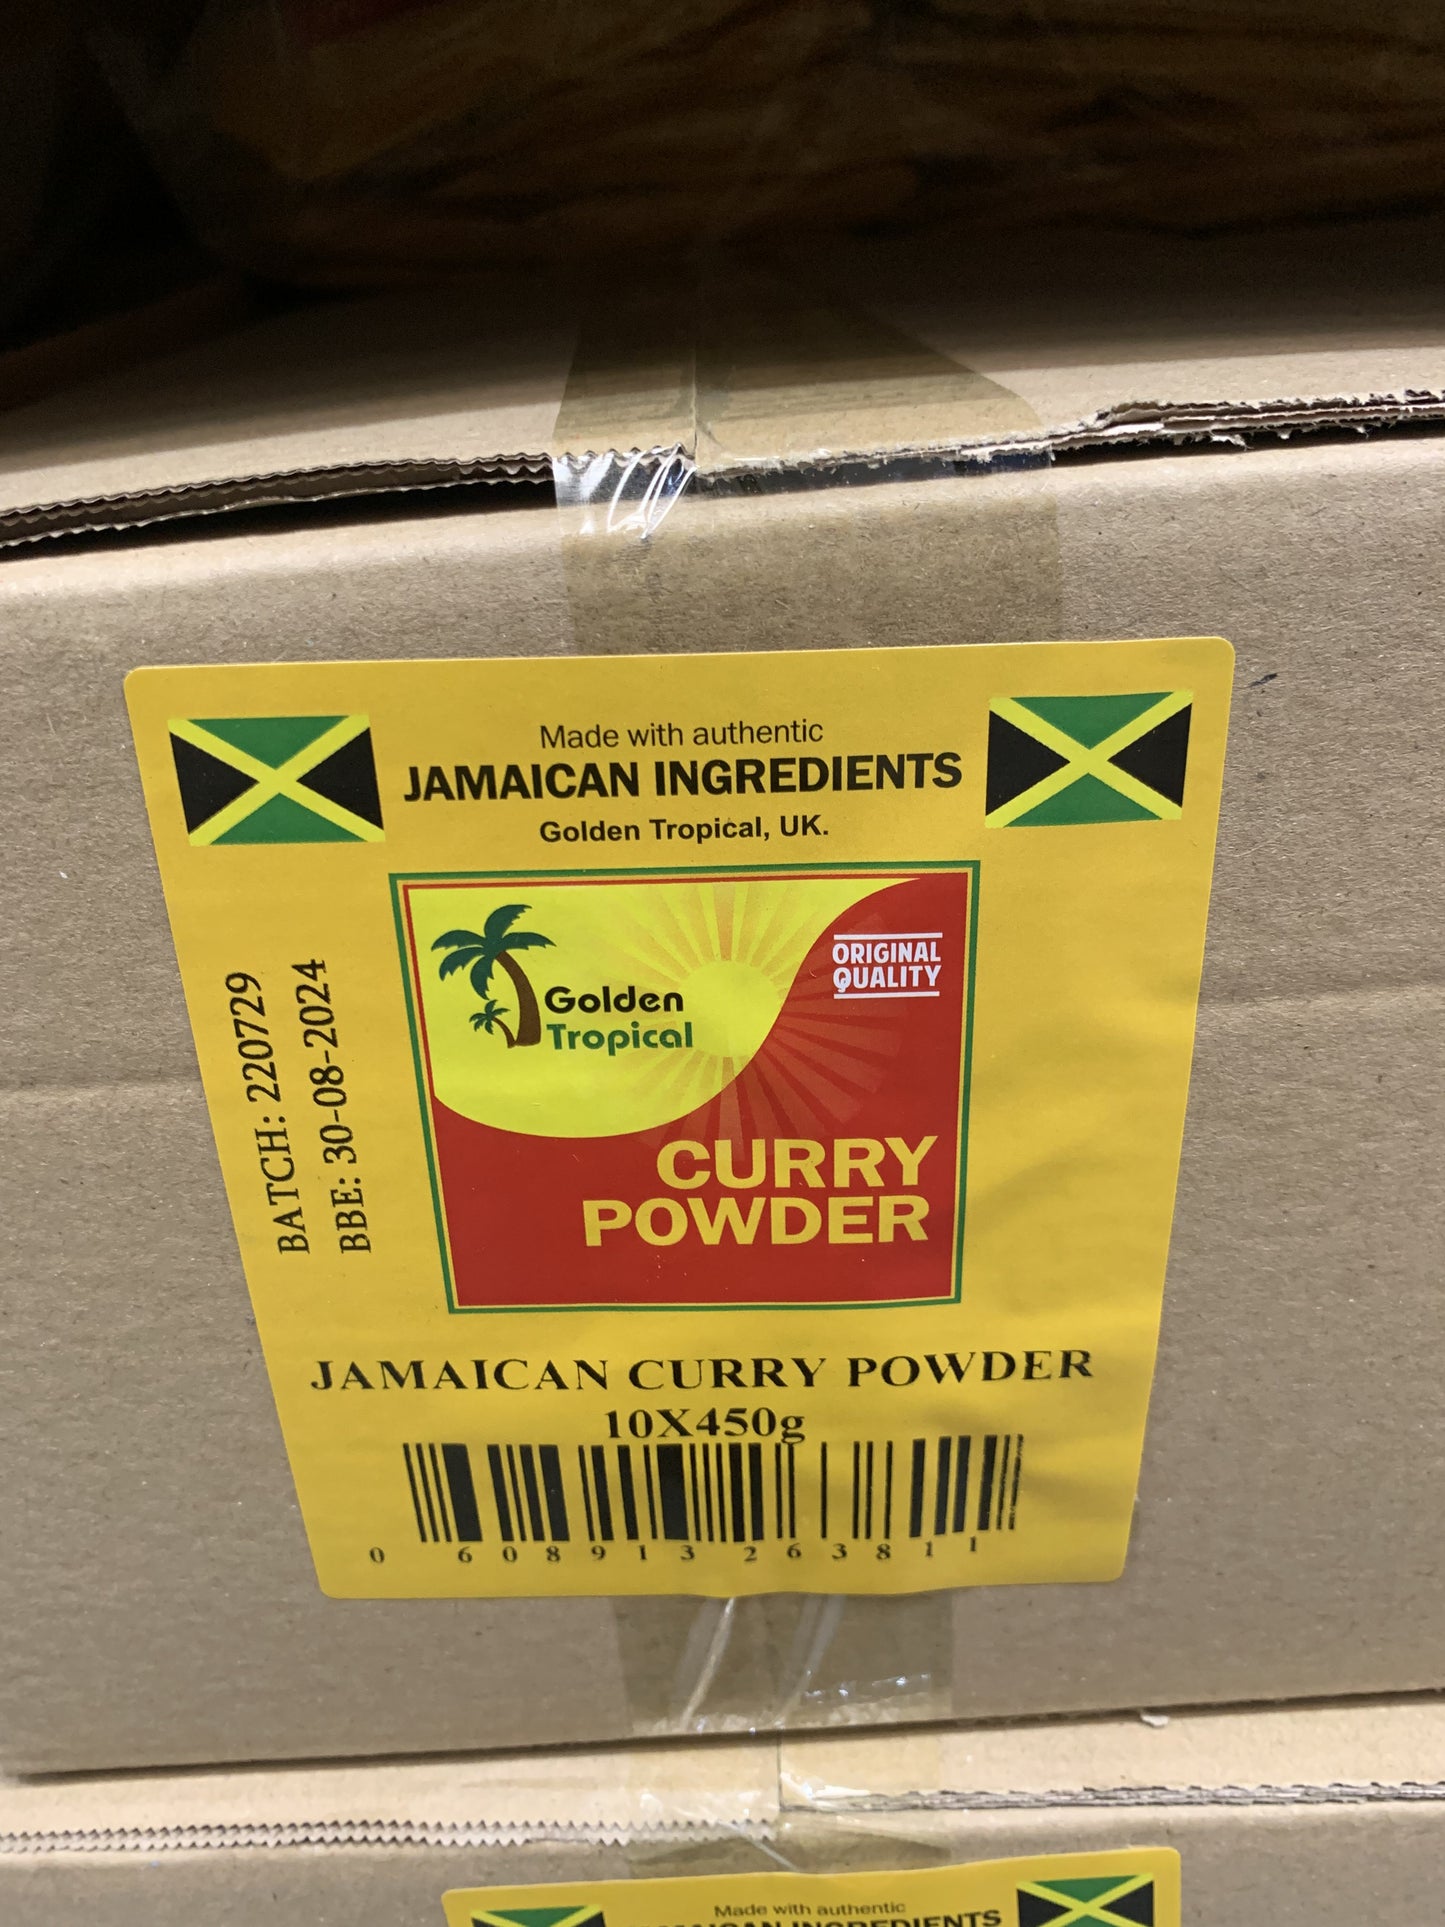 Golden Tropical Jamaican Curry Powder 450g Case of 10